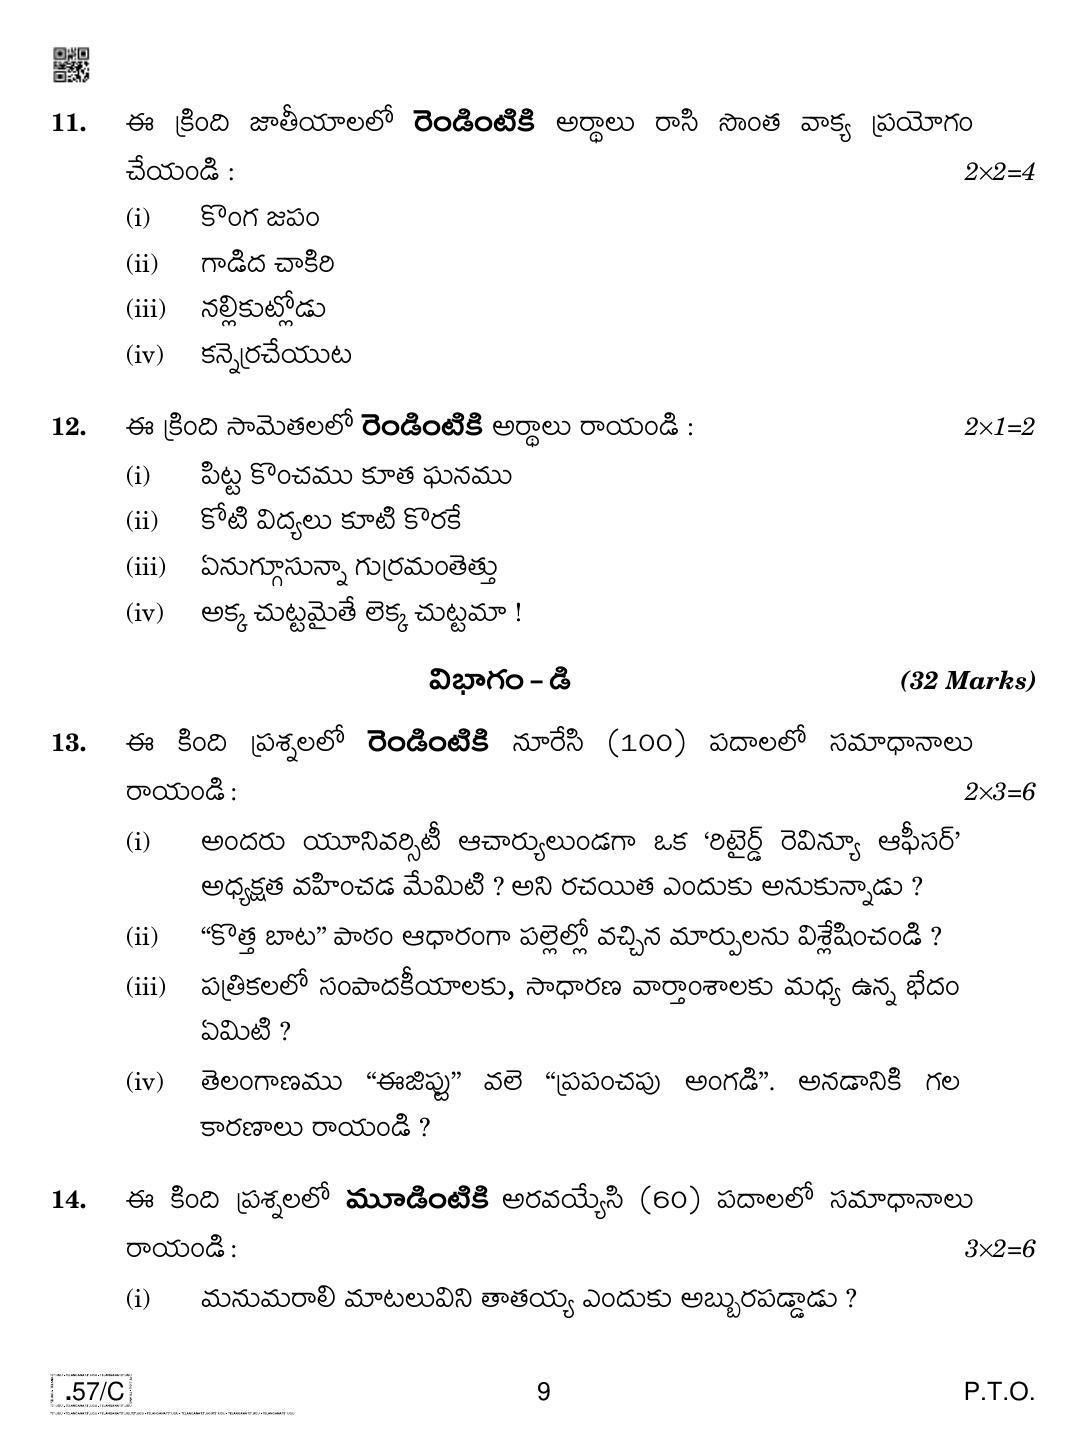 CBSE Class 10 Telug Telangana 2020 Compartment Question Paper - Page 9